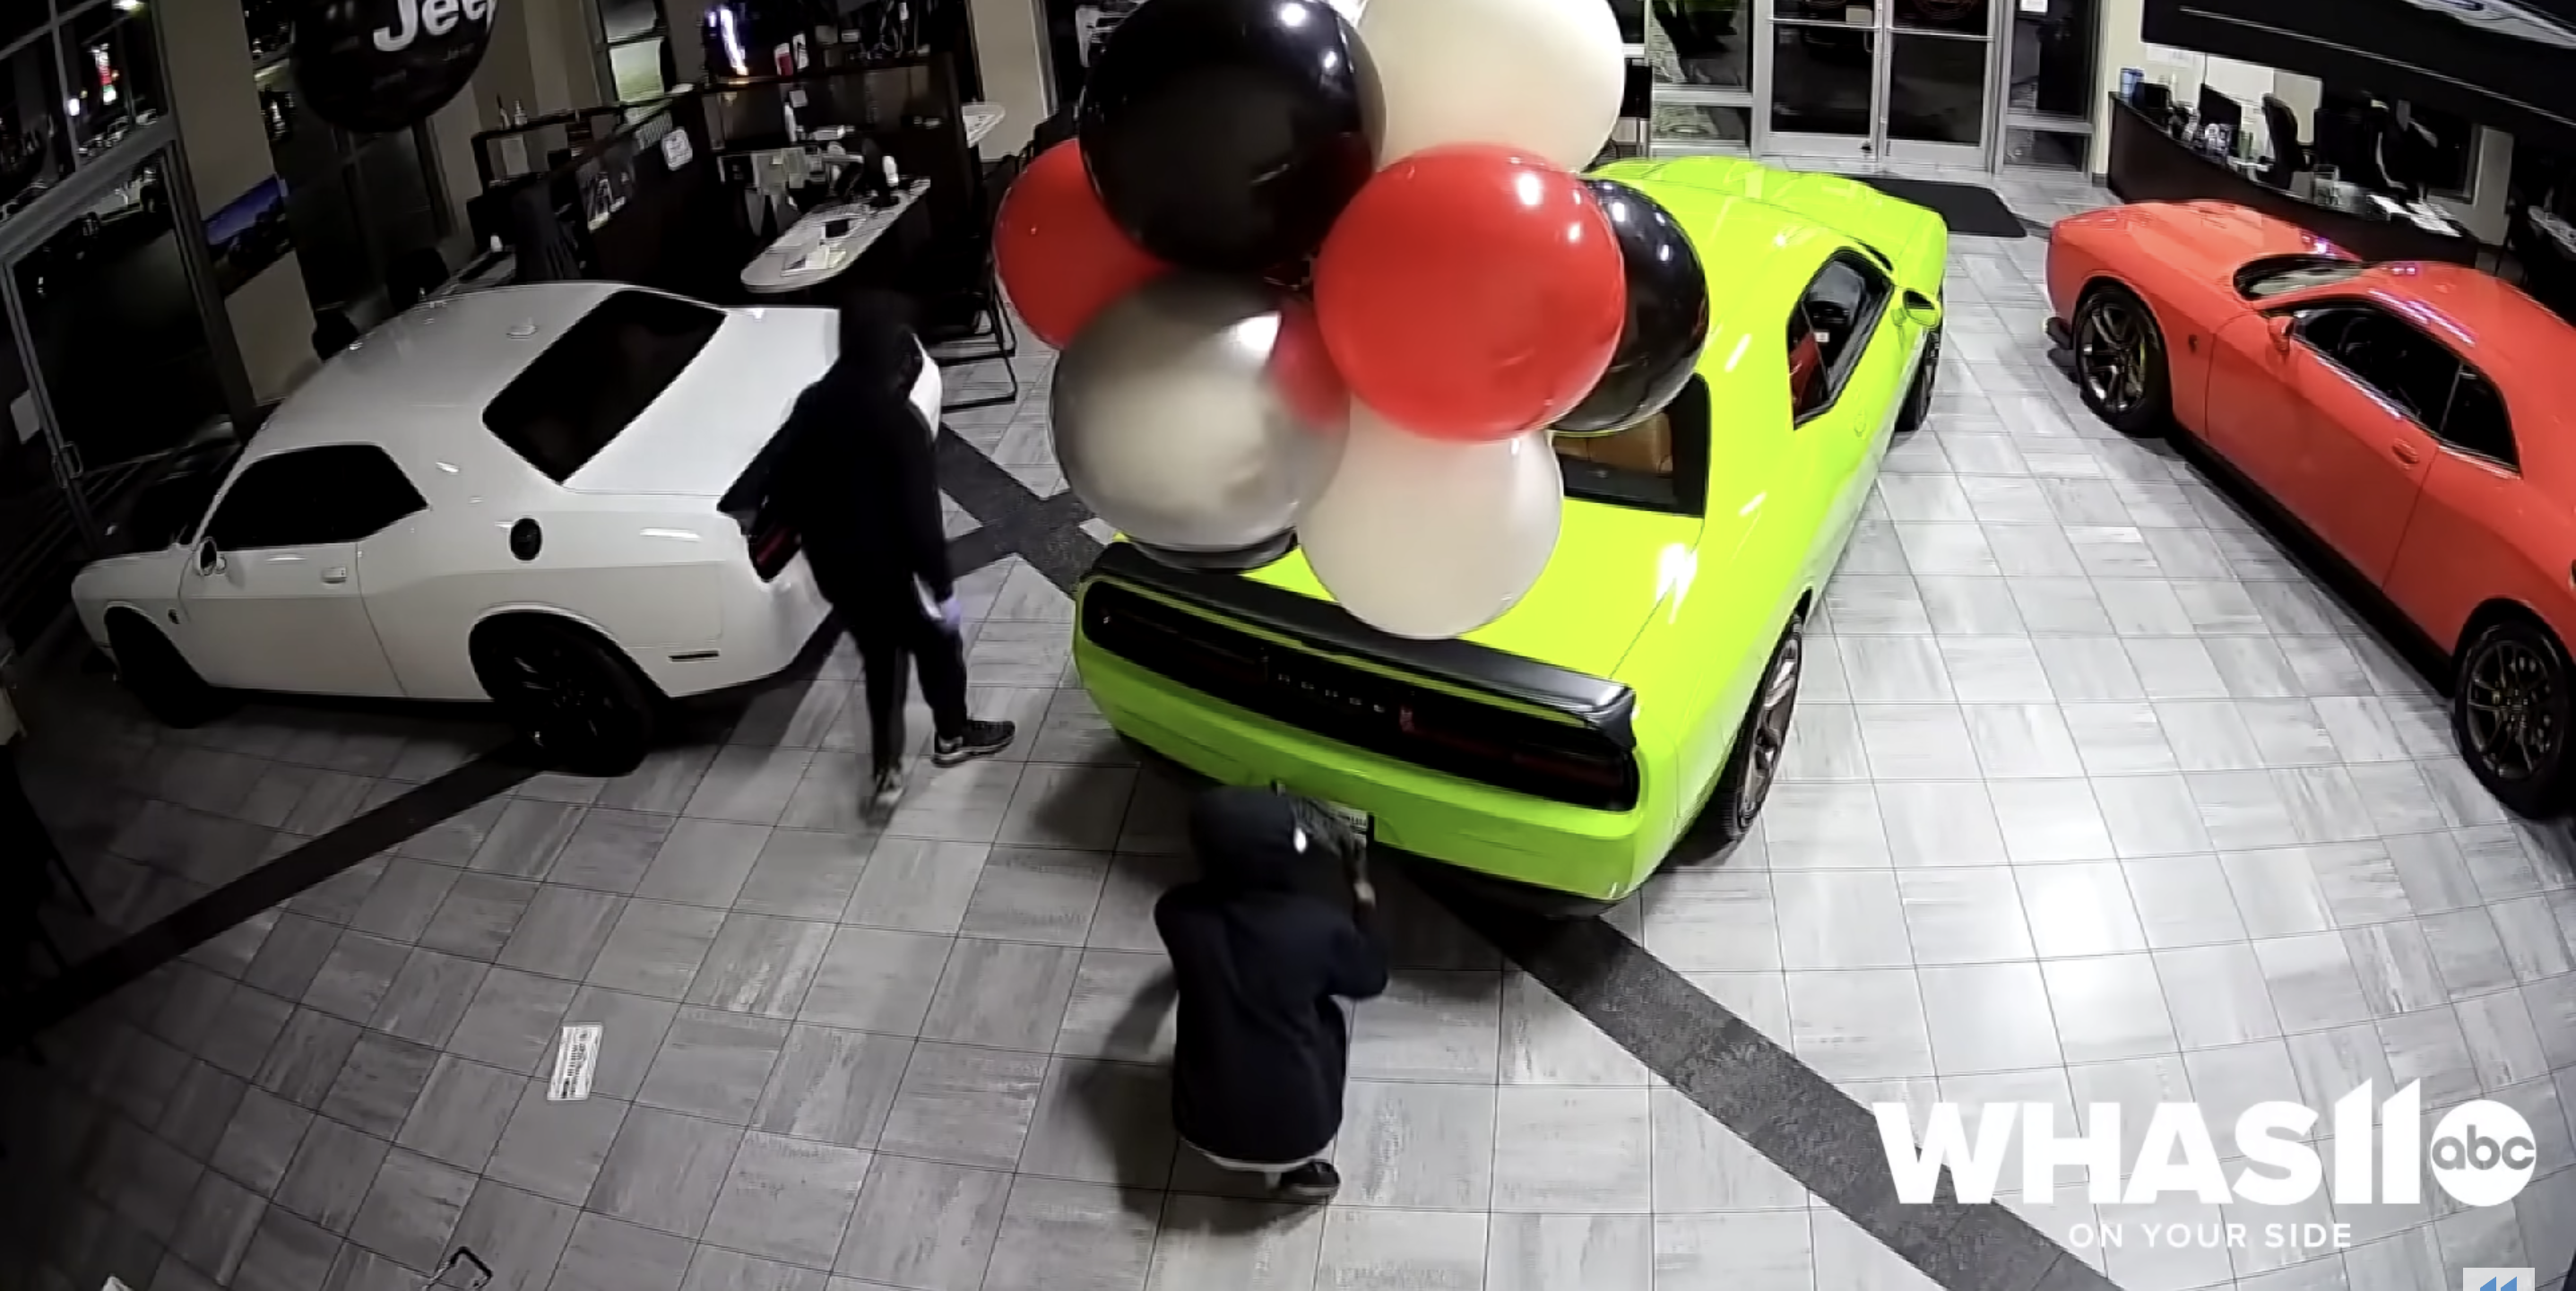 Gone in 60 Seconds: Video Shows Six Hellcats Stolen From Dealership in Under a Minute